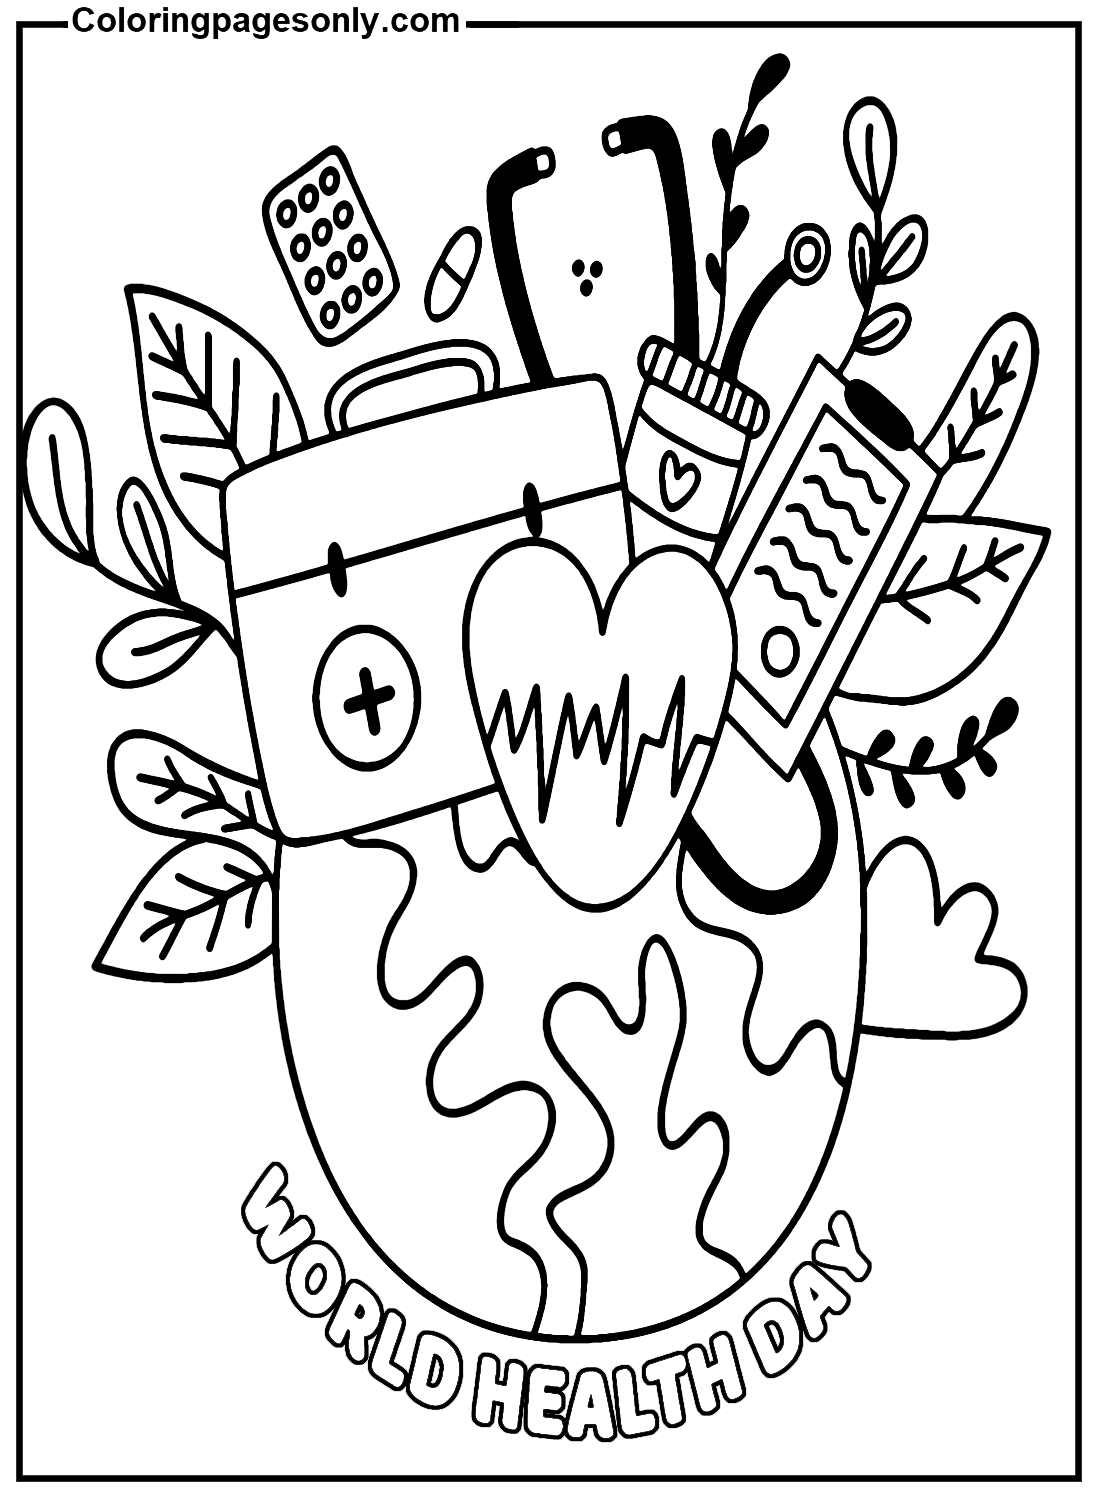 World health day sheets coloring page